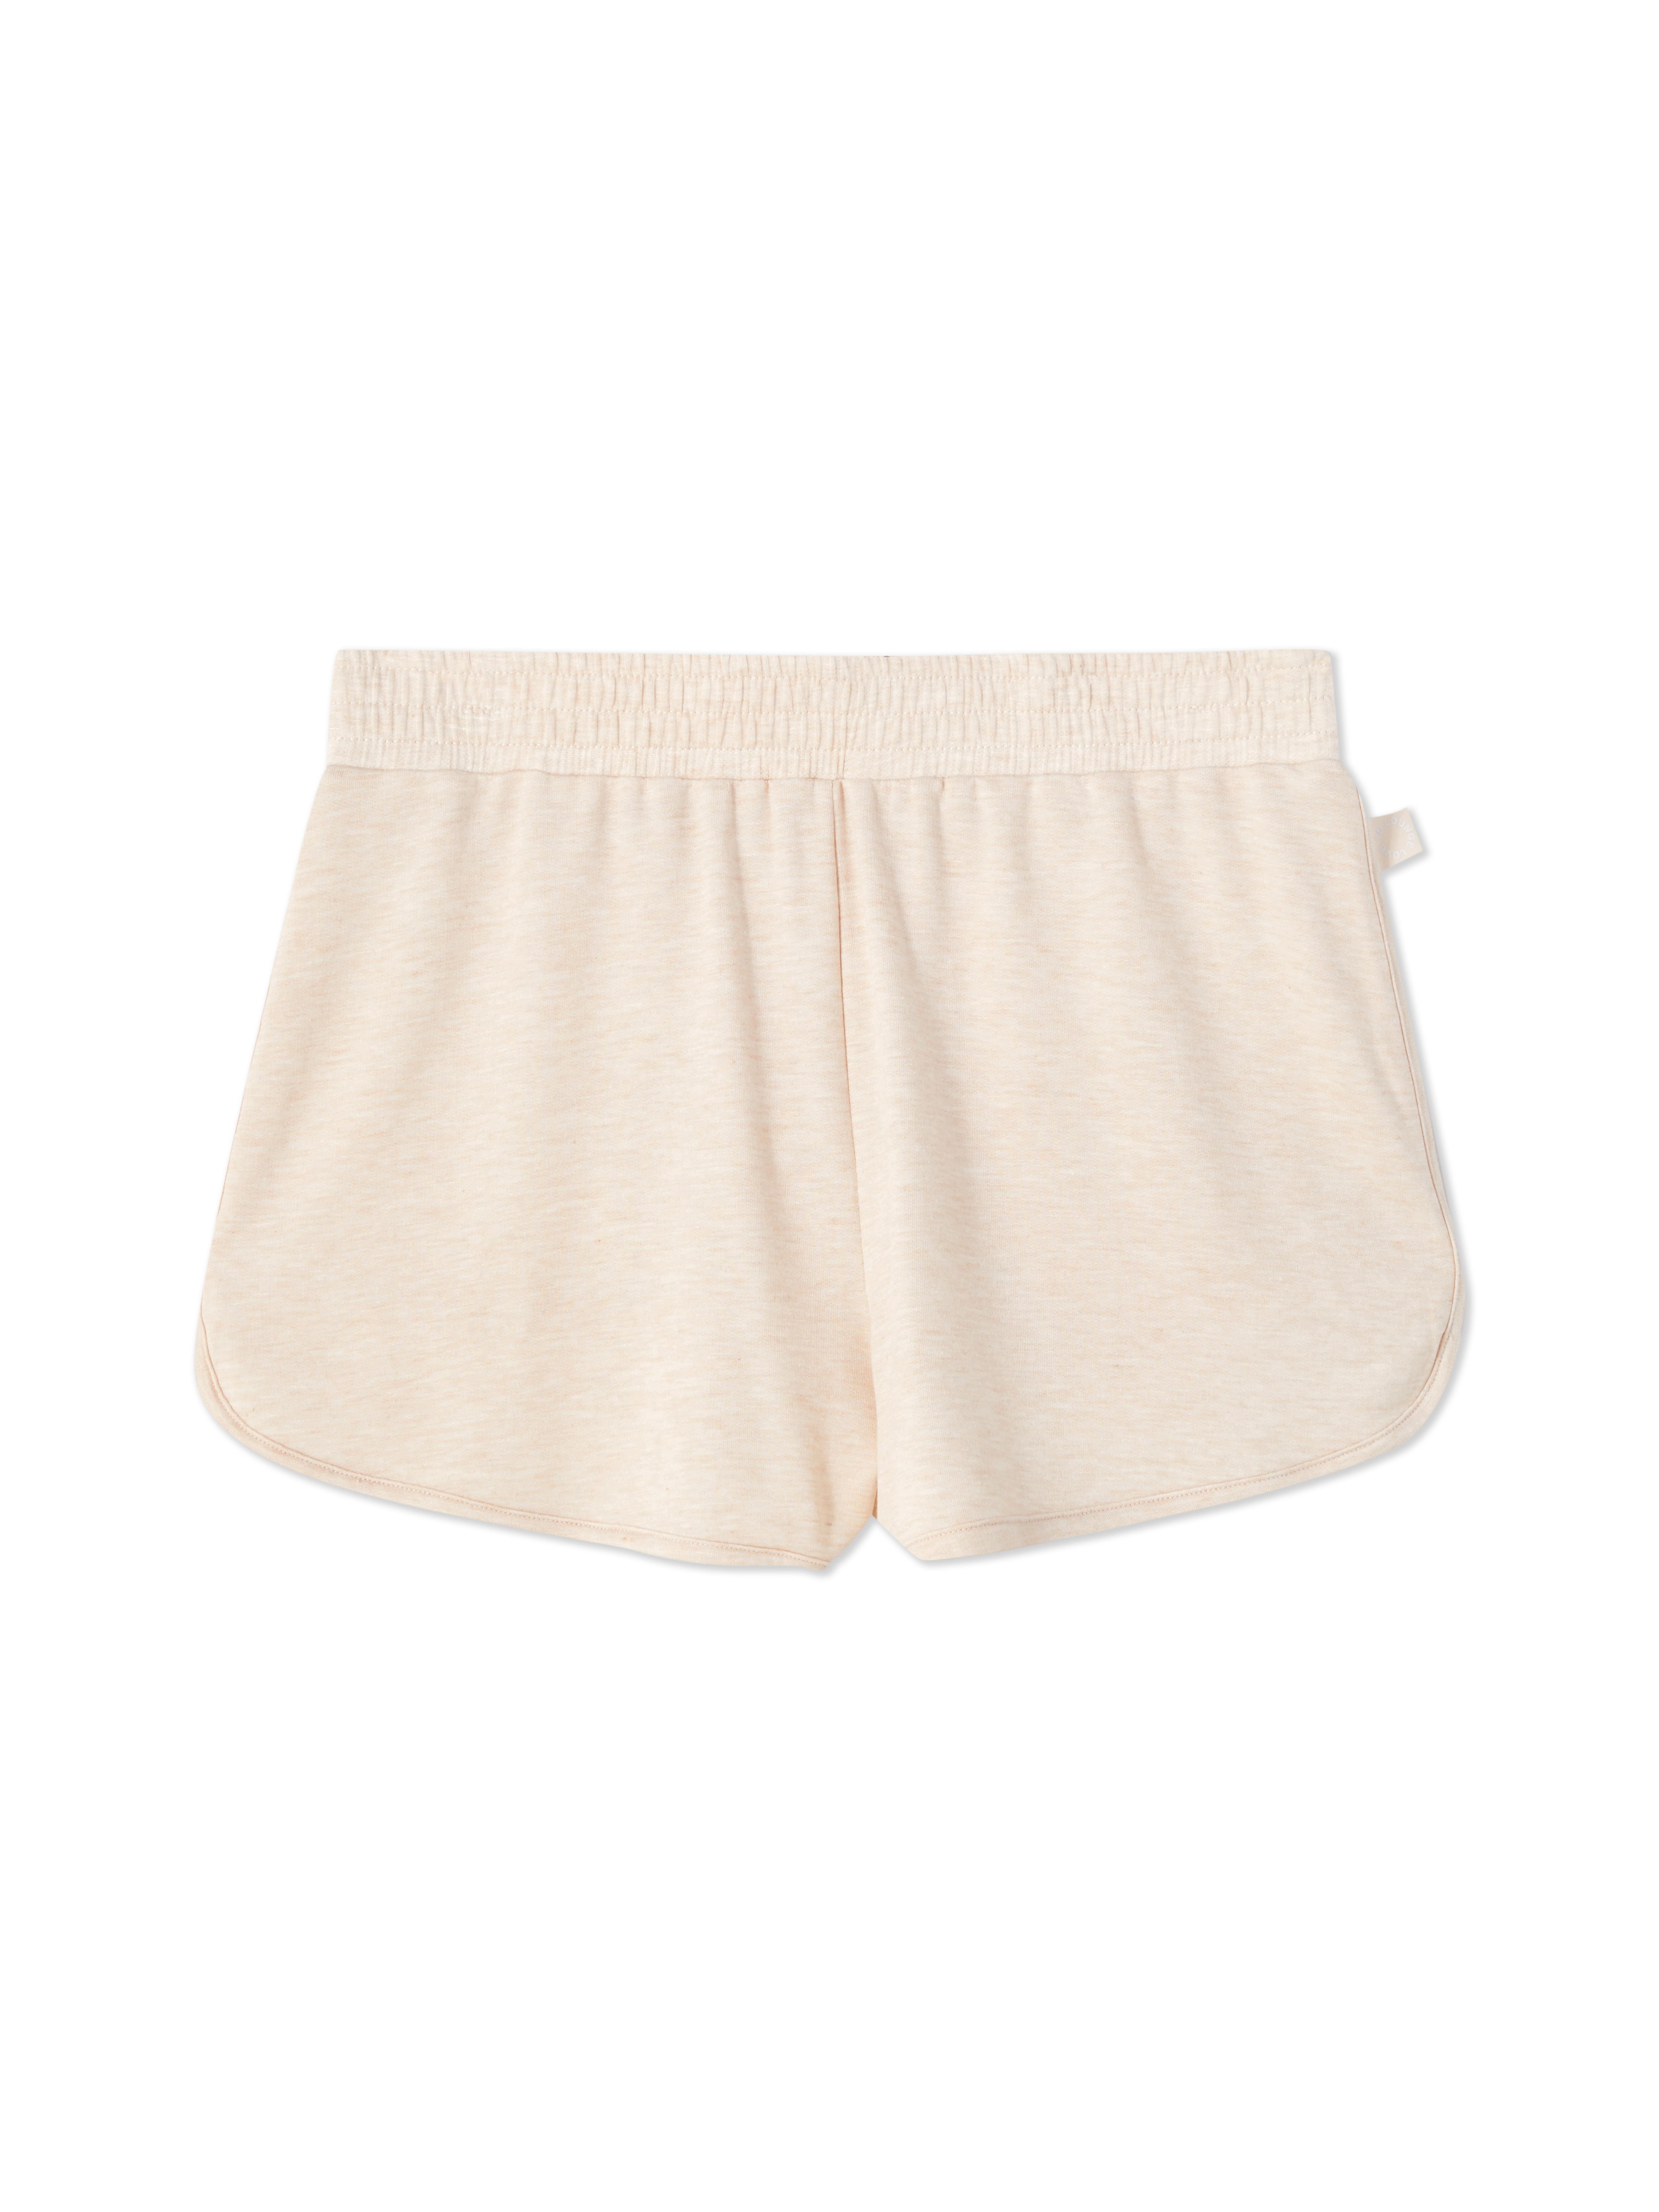 Terry Cotton Bed Shorts